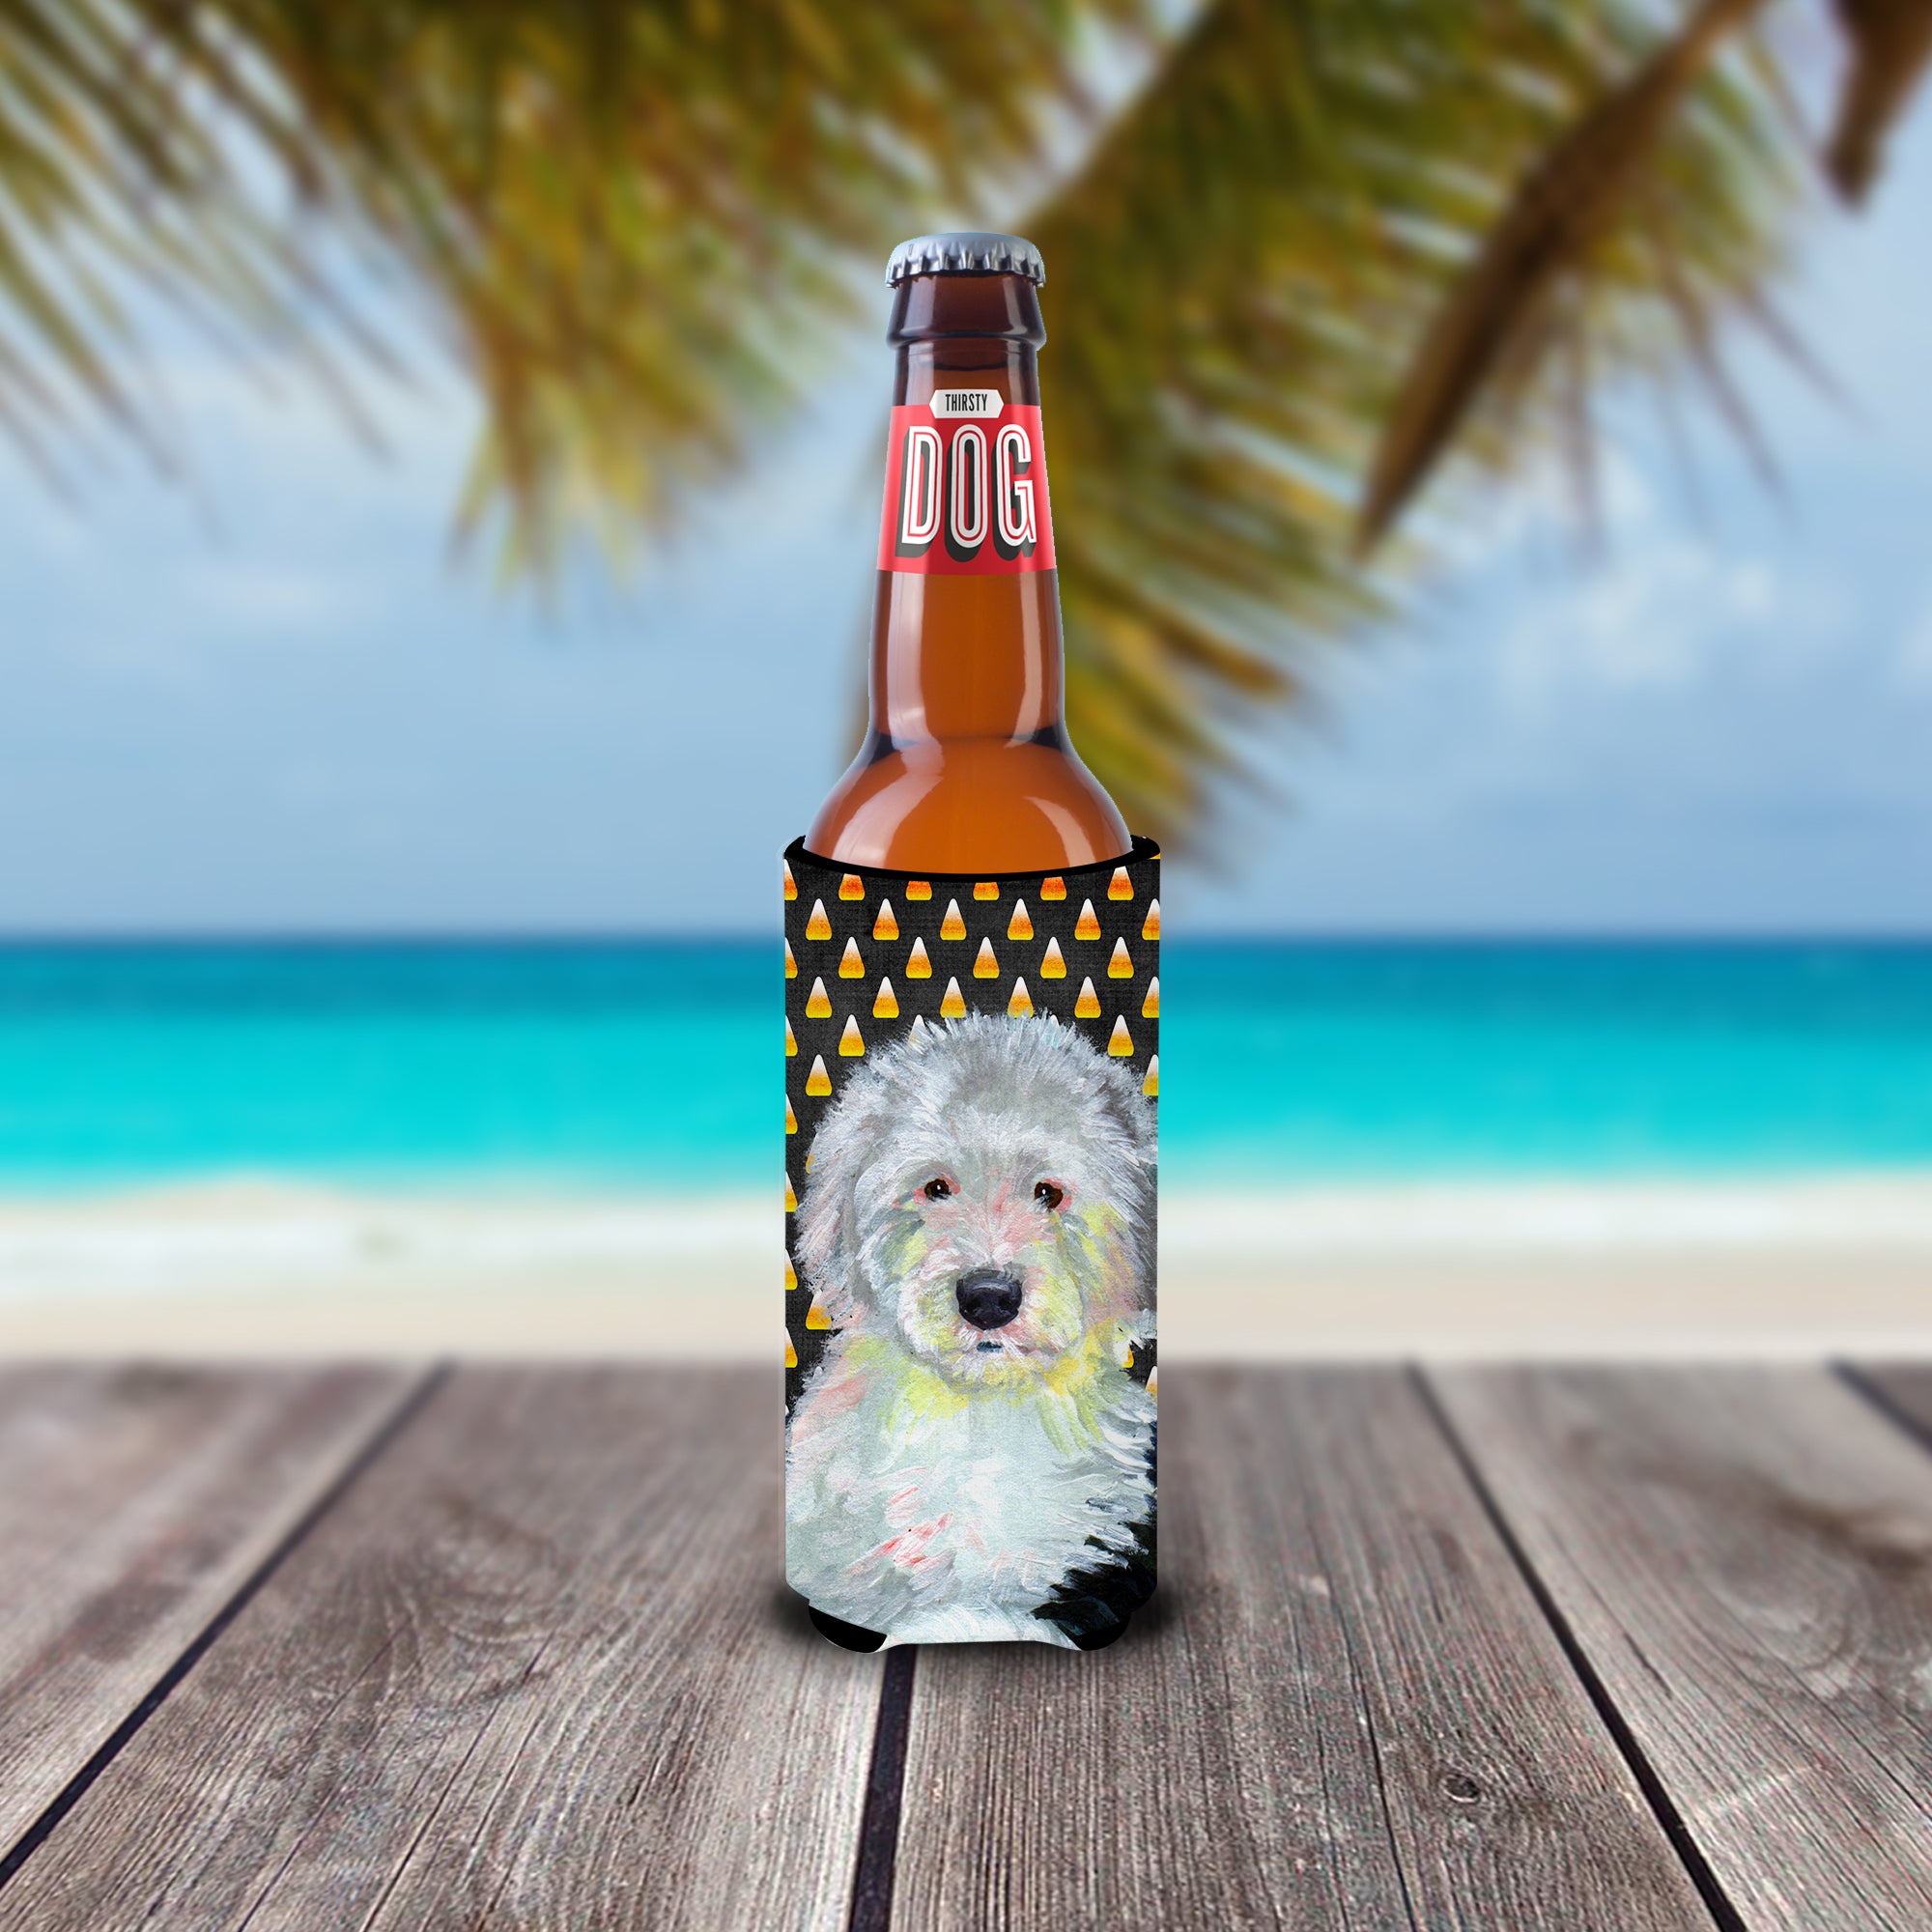 Old English Sheepdog Candy Corn Halloween Portrait Ultra Beverage Insulators for slim cans LH9046MUK